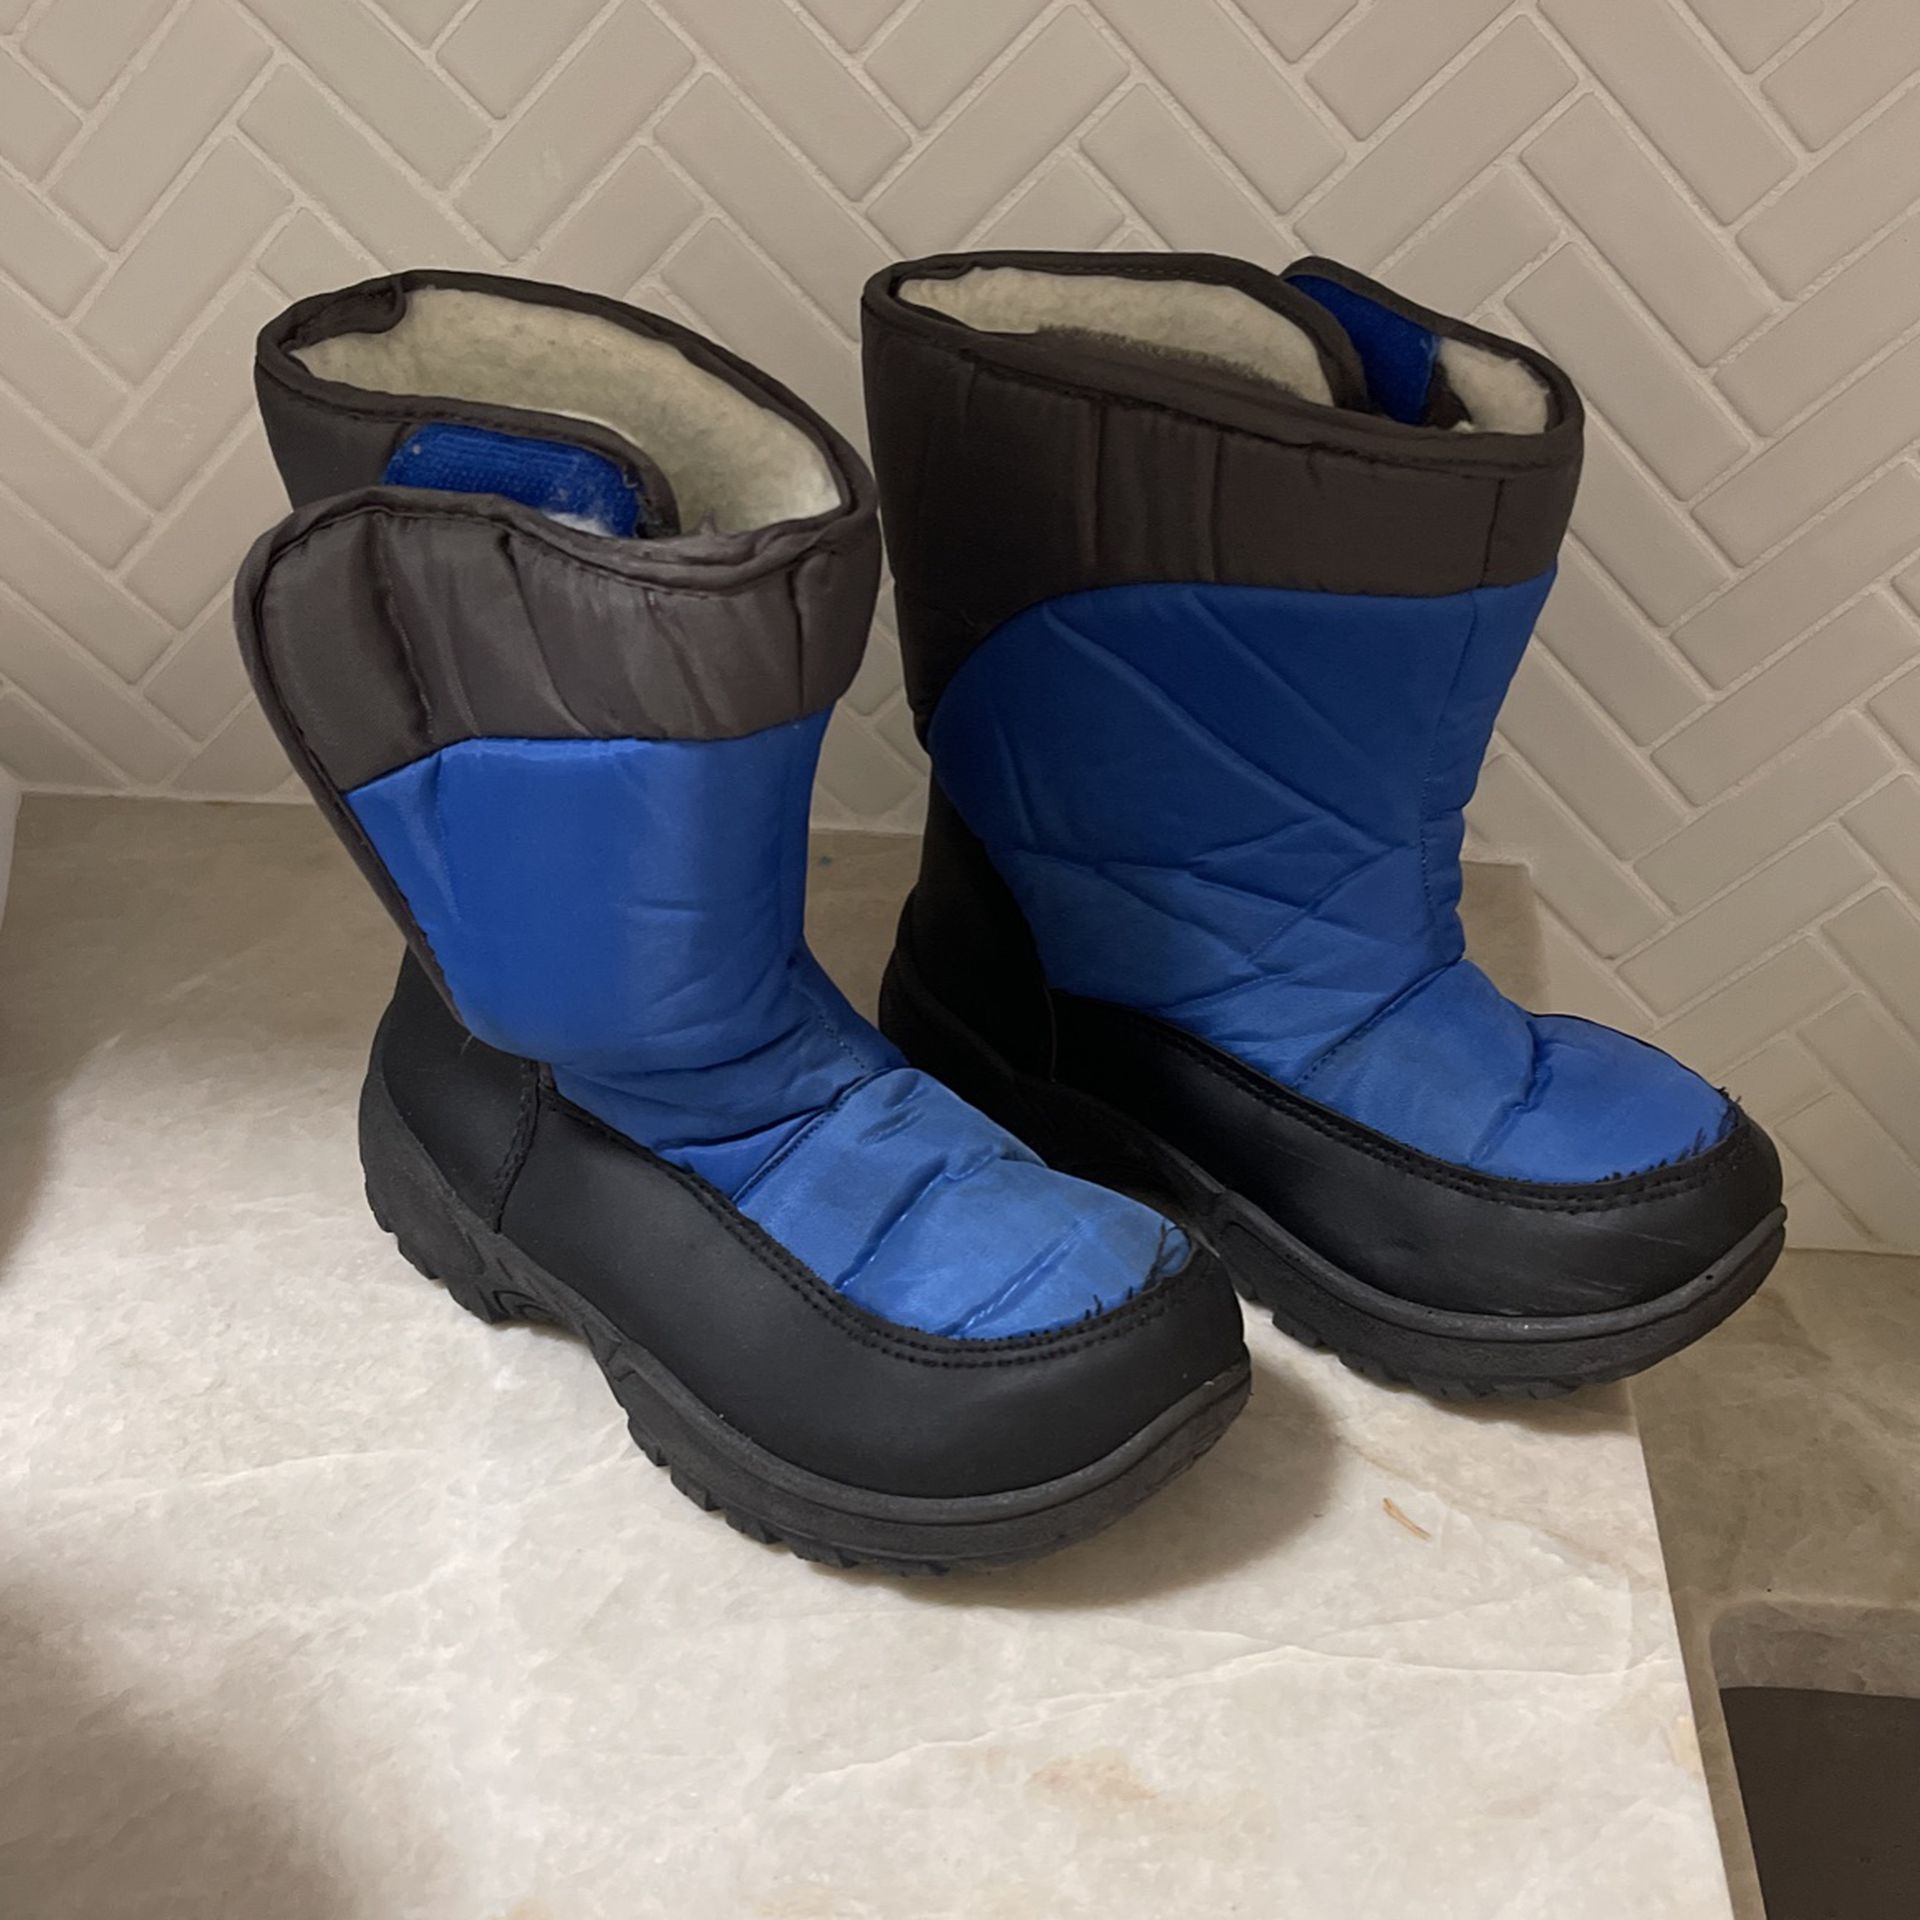 Snow Boots For Little Kid Size 13